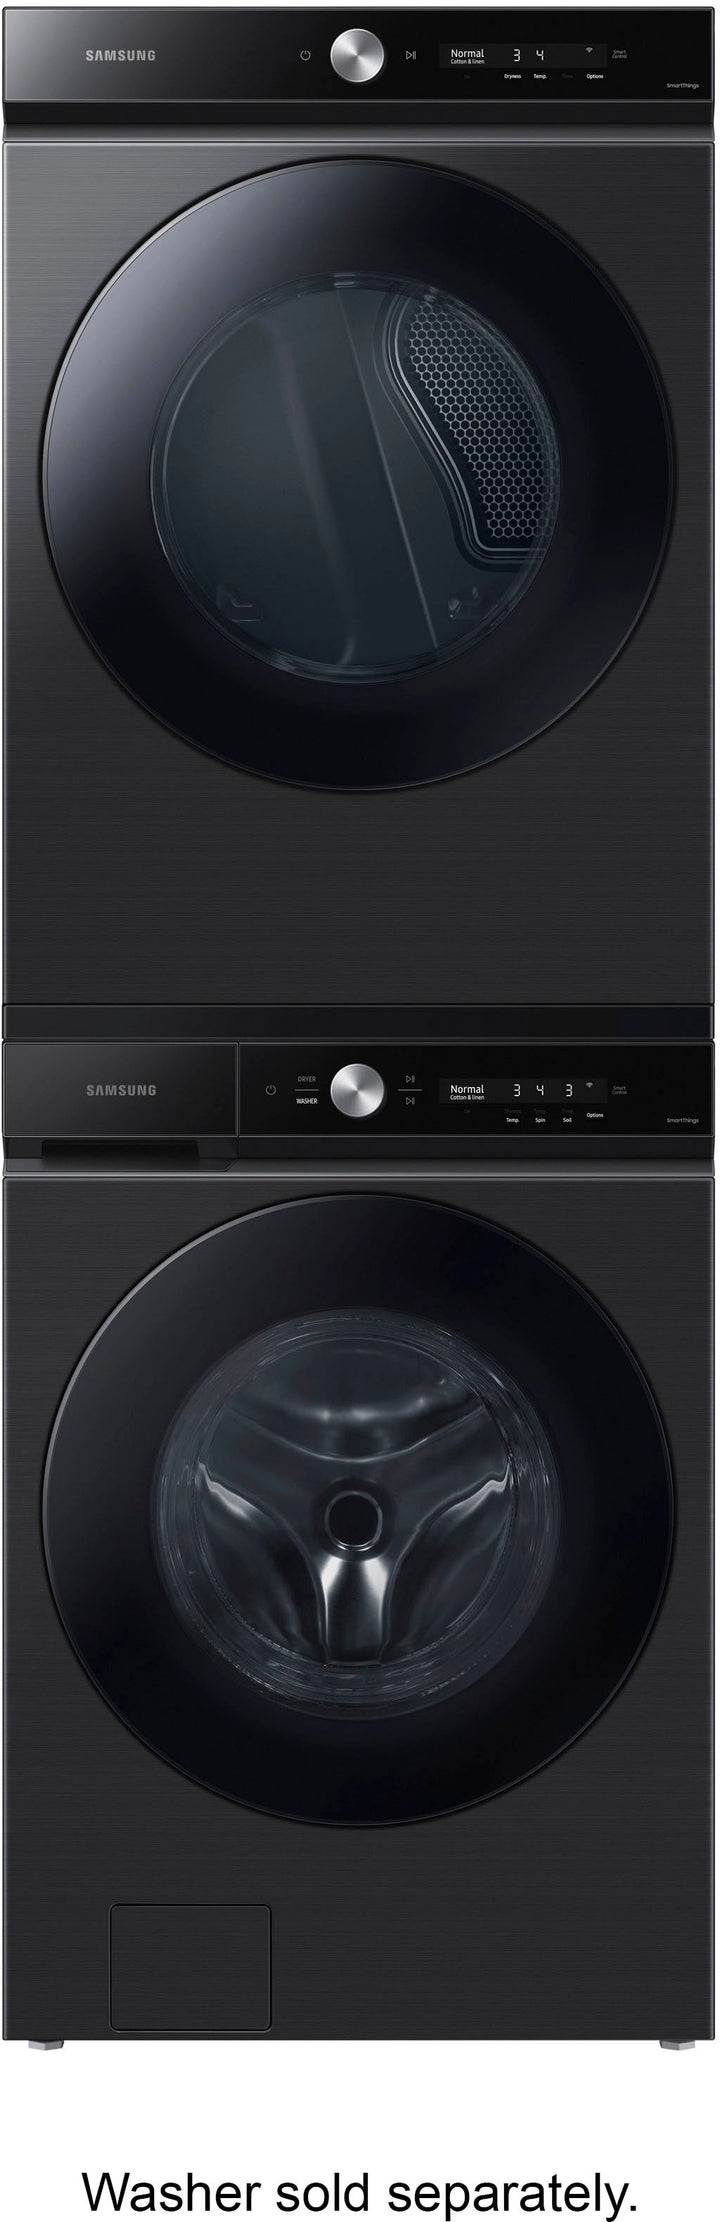 Samsung - Bespoke 7.6 cu. ft. Ultra Capacity Electric Dryer with Super Speed Dry and AI Smart Dial - Brushed black_11